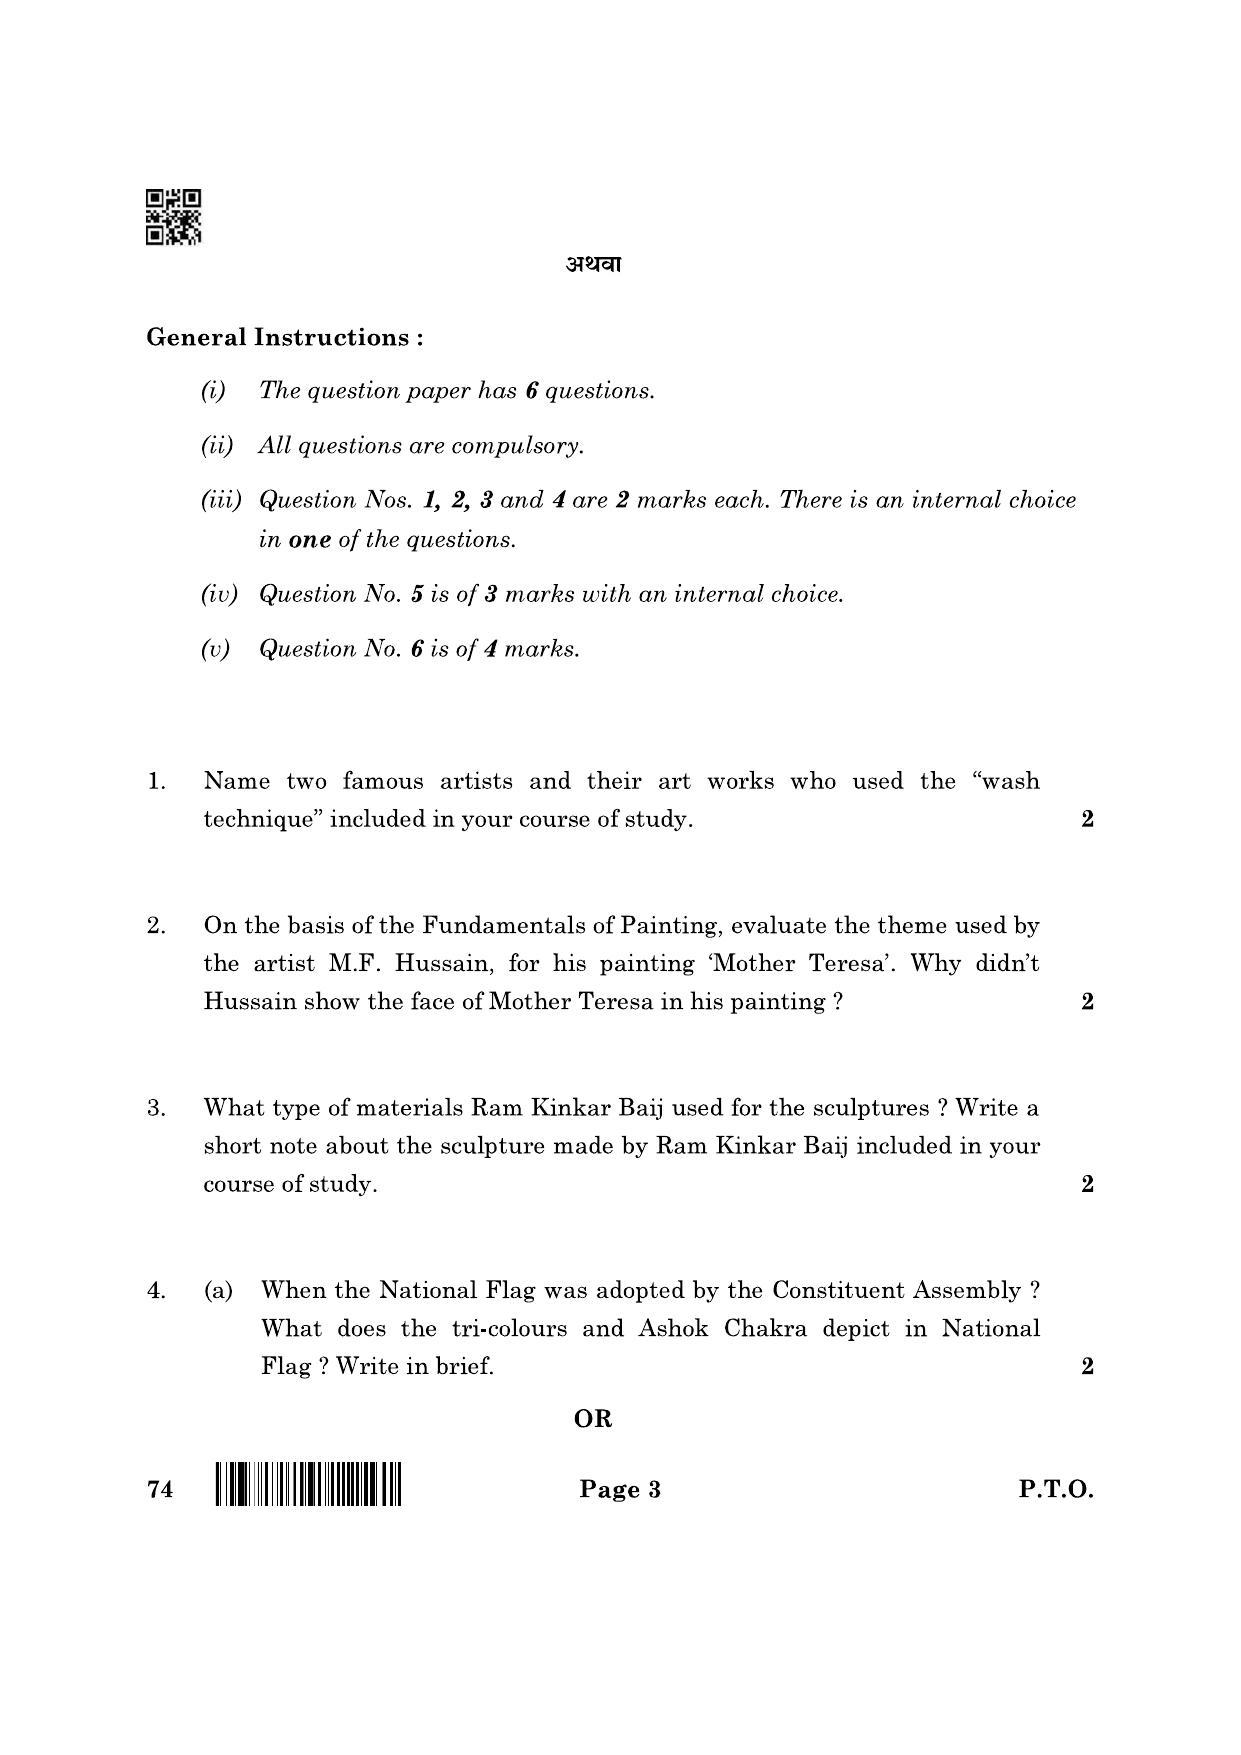 CBSE Class 12 74_Graphics 2022 Question Paper - Page 3